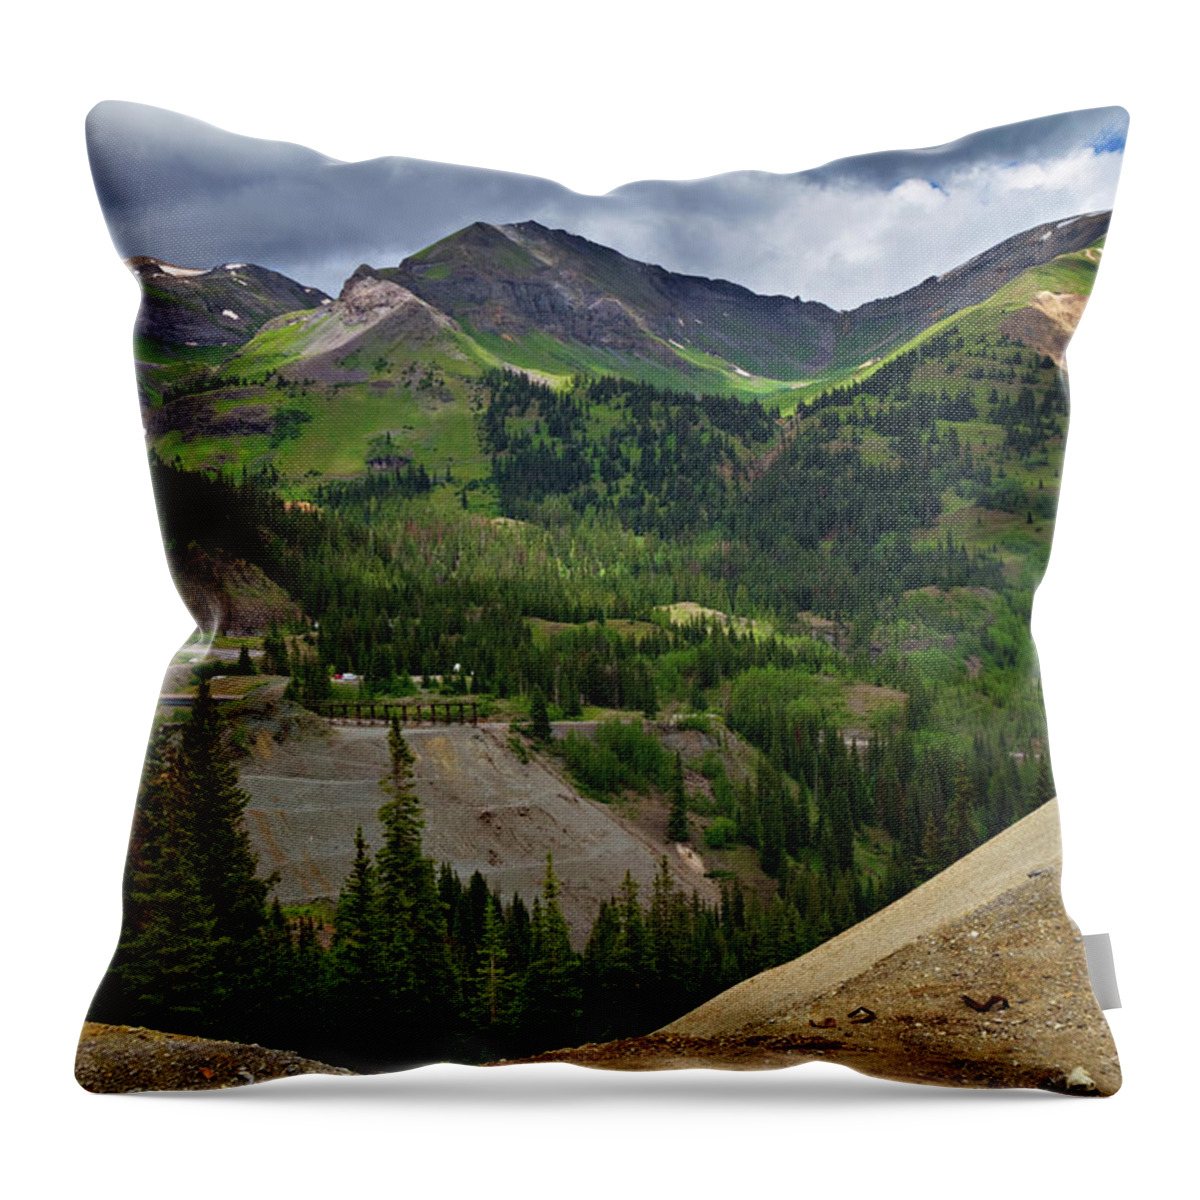 Colorado Throw Pillow featuring the photograph 550 View by Lana Trussell